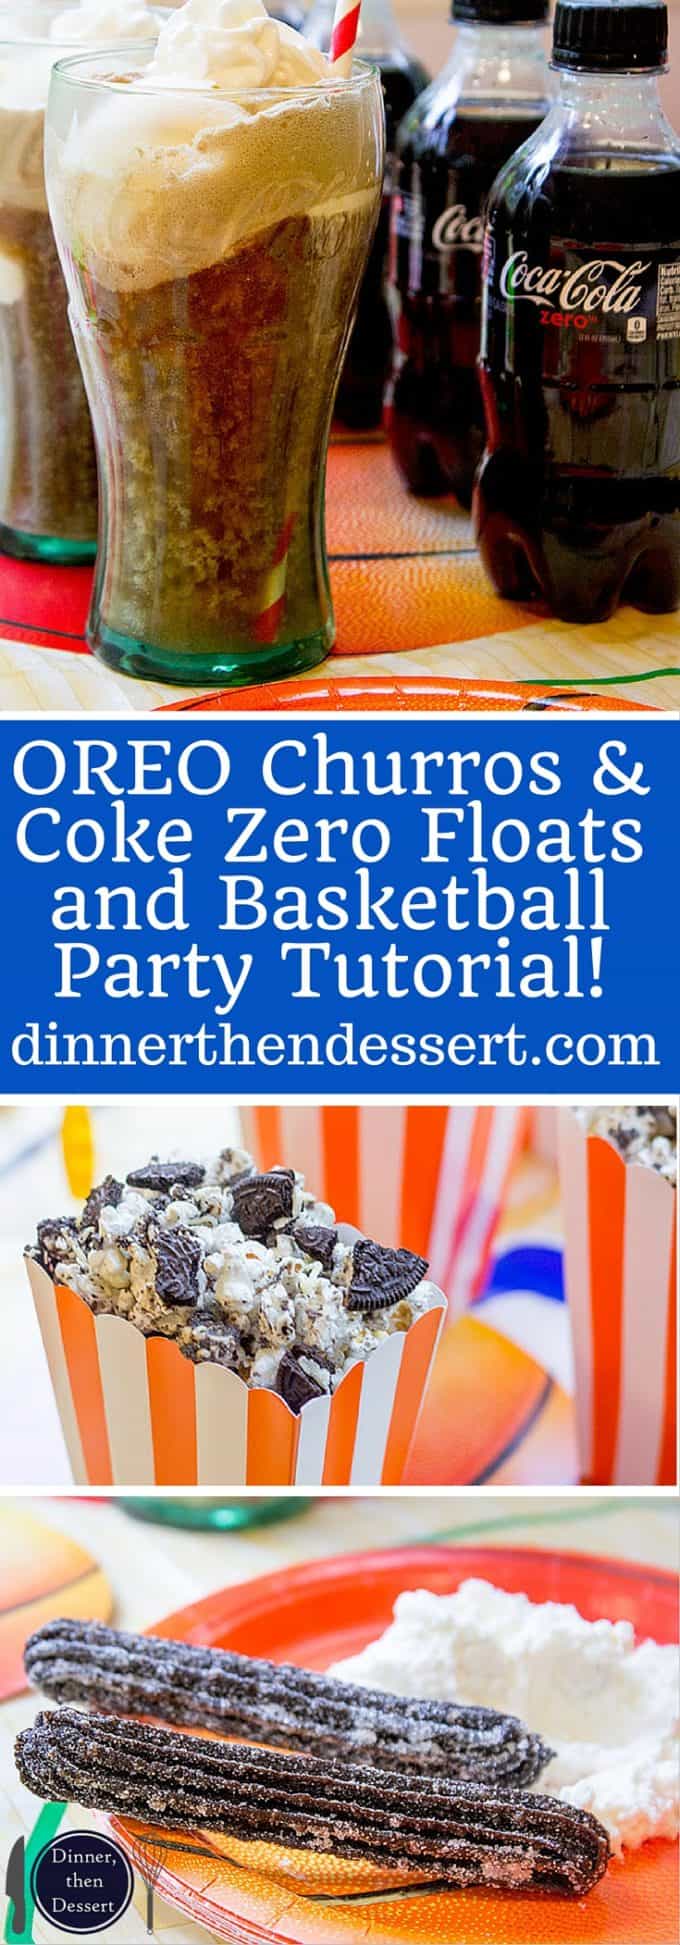 OREO Churros are crispy, tender, perfectly chocolate-y and perfectly paired with OREO filling whipped cream dip for dunking and a party tutorial for a Carnival themed Basketball Party! AD. Now you can have the viral recipe made easy. #GreatTasteTourney